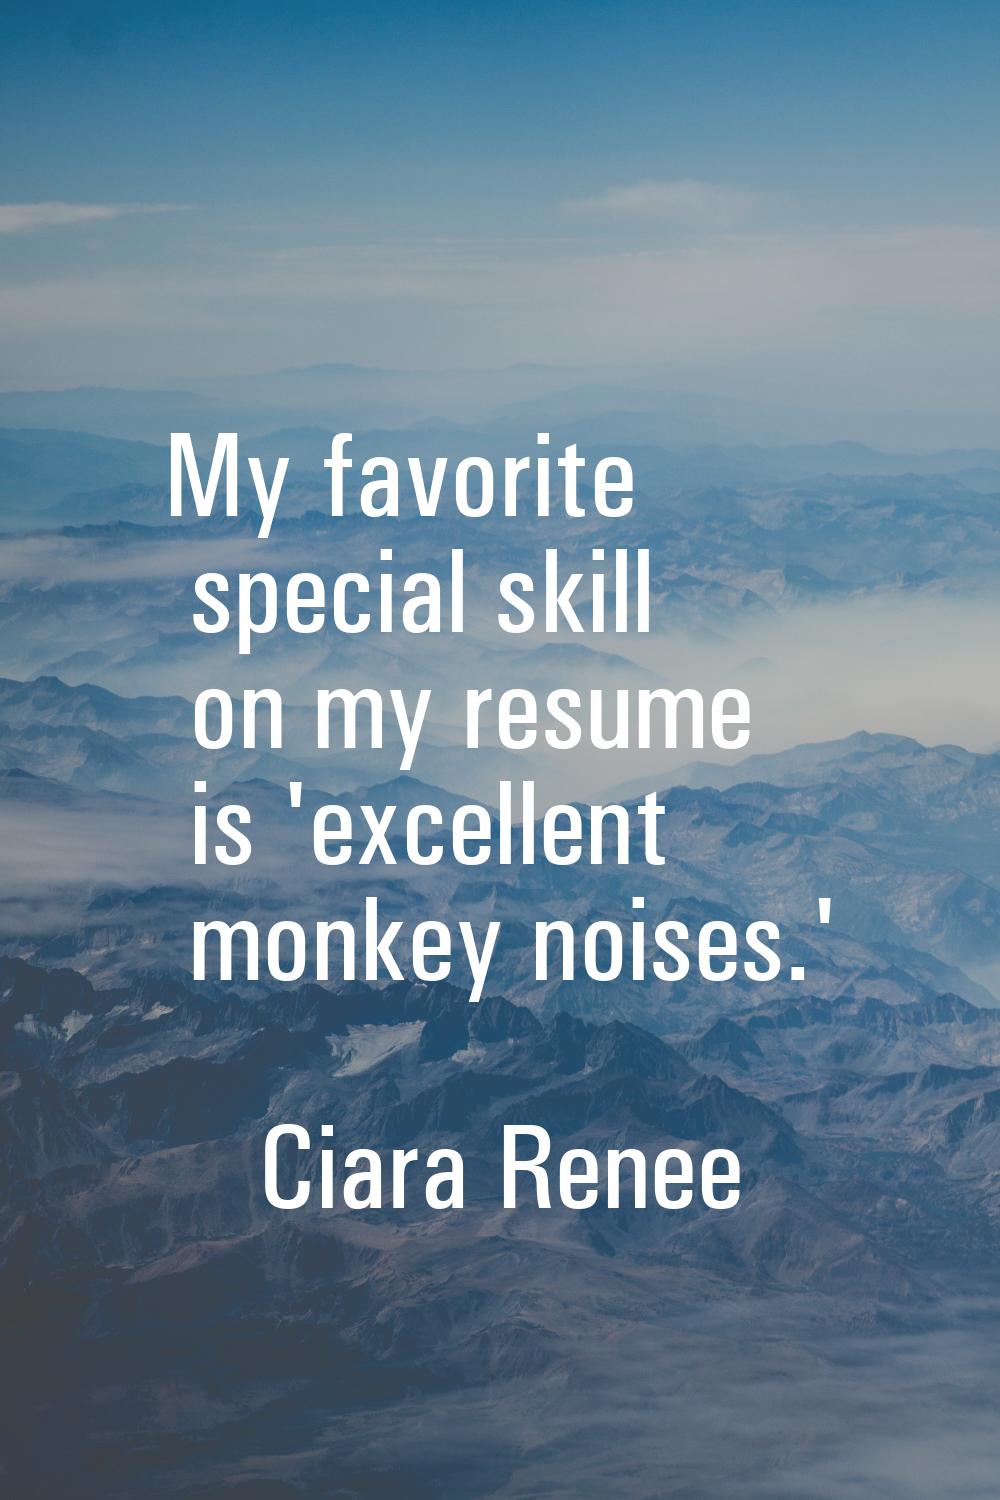 My favorite special skill on my resume is 'excellent monkey noises.'